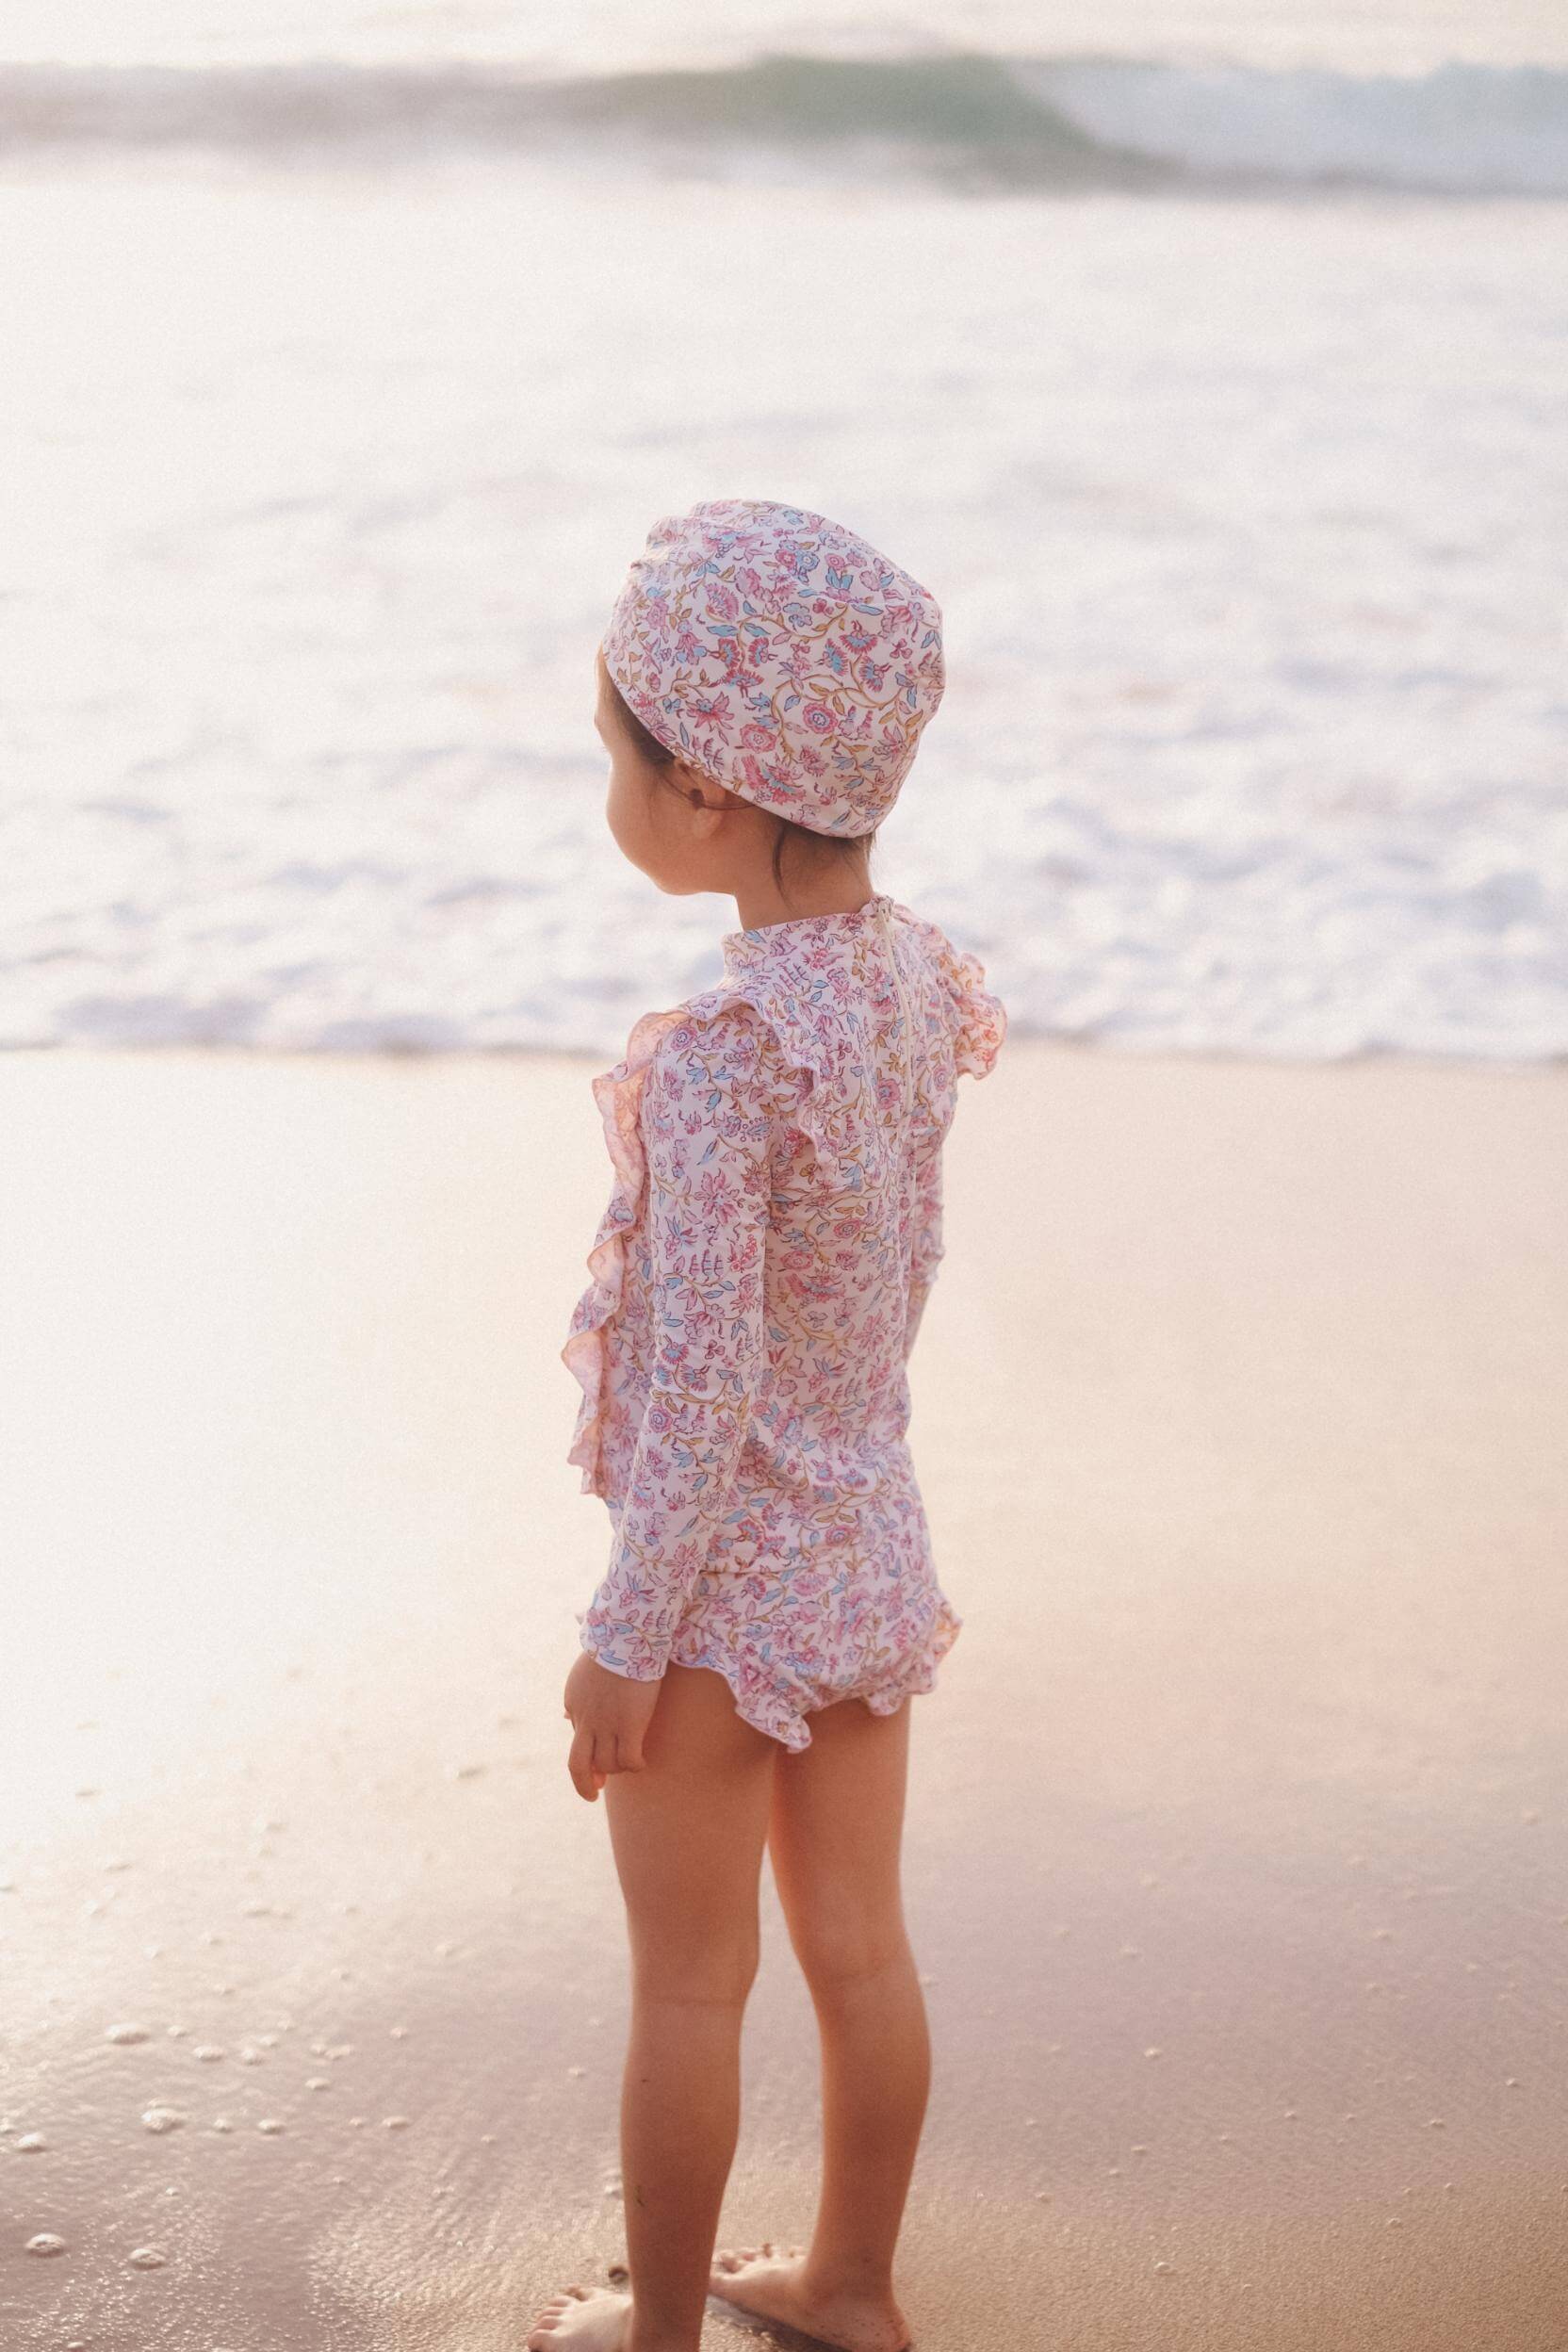 The most popular girl's swim set is in new print - cream Padma mundra (bright and vibrant!). It is made with recycled materials and SPF 50 sun protection by Louise Misha. The girl's swimwear is lightweight and stylish -perfect for beaches and swimming pools—shop girl's swimwear online in Hong Kong and Singapore.